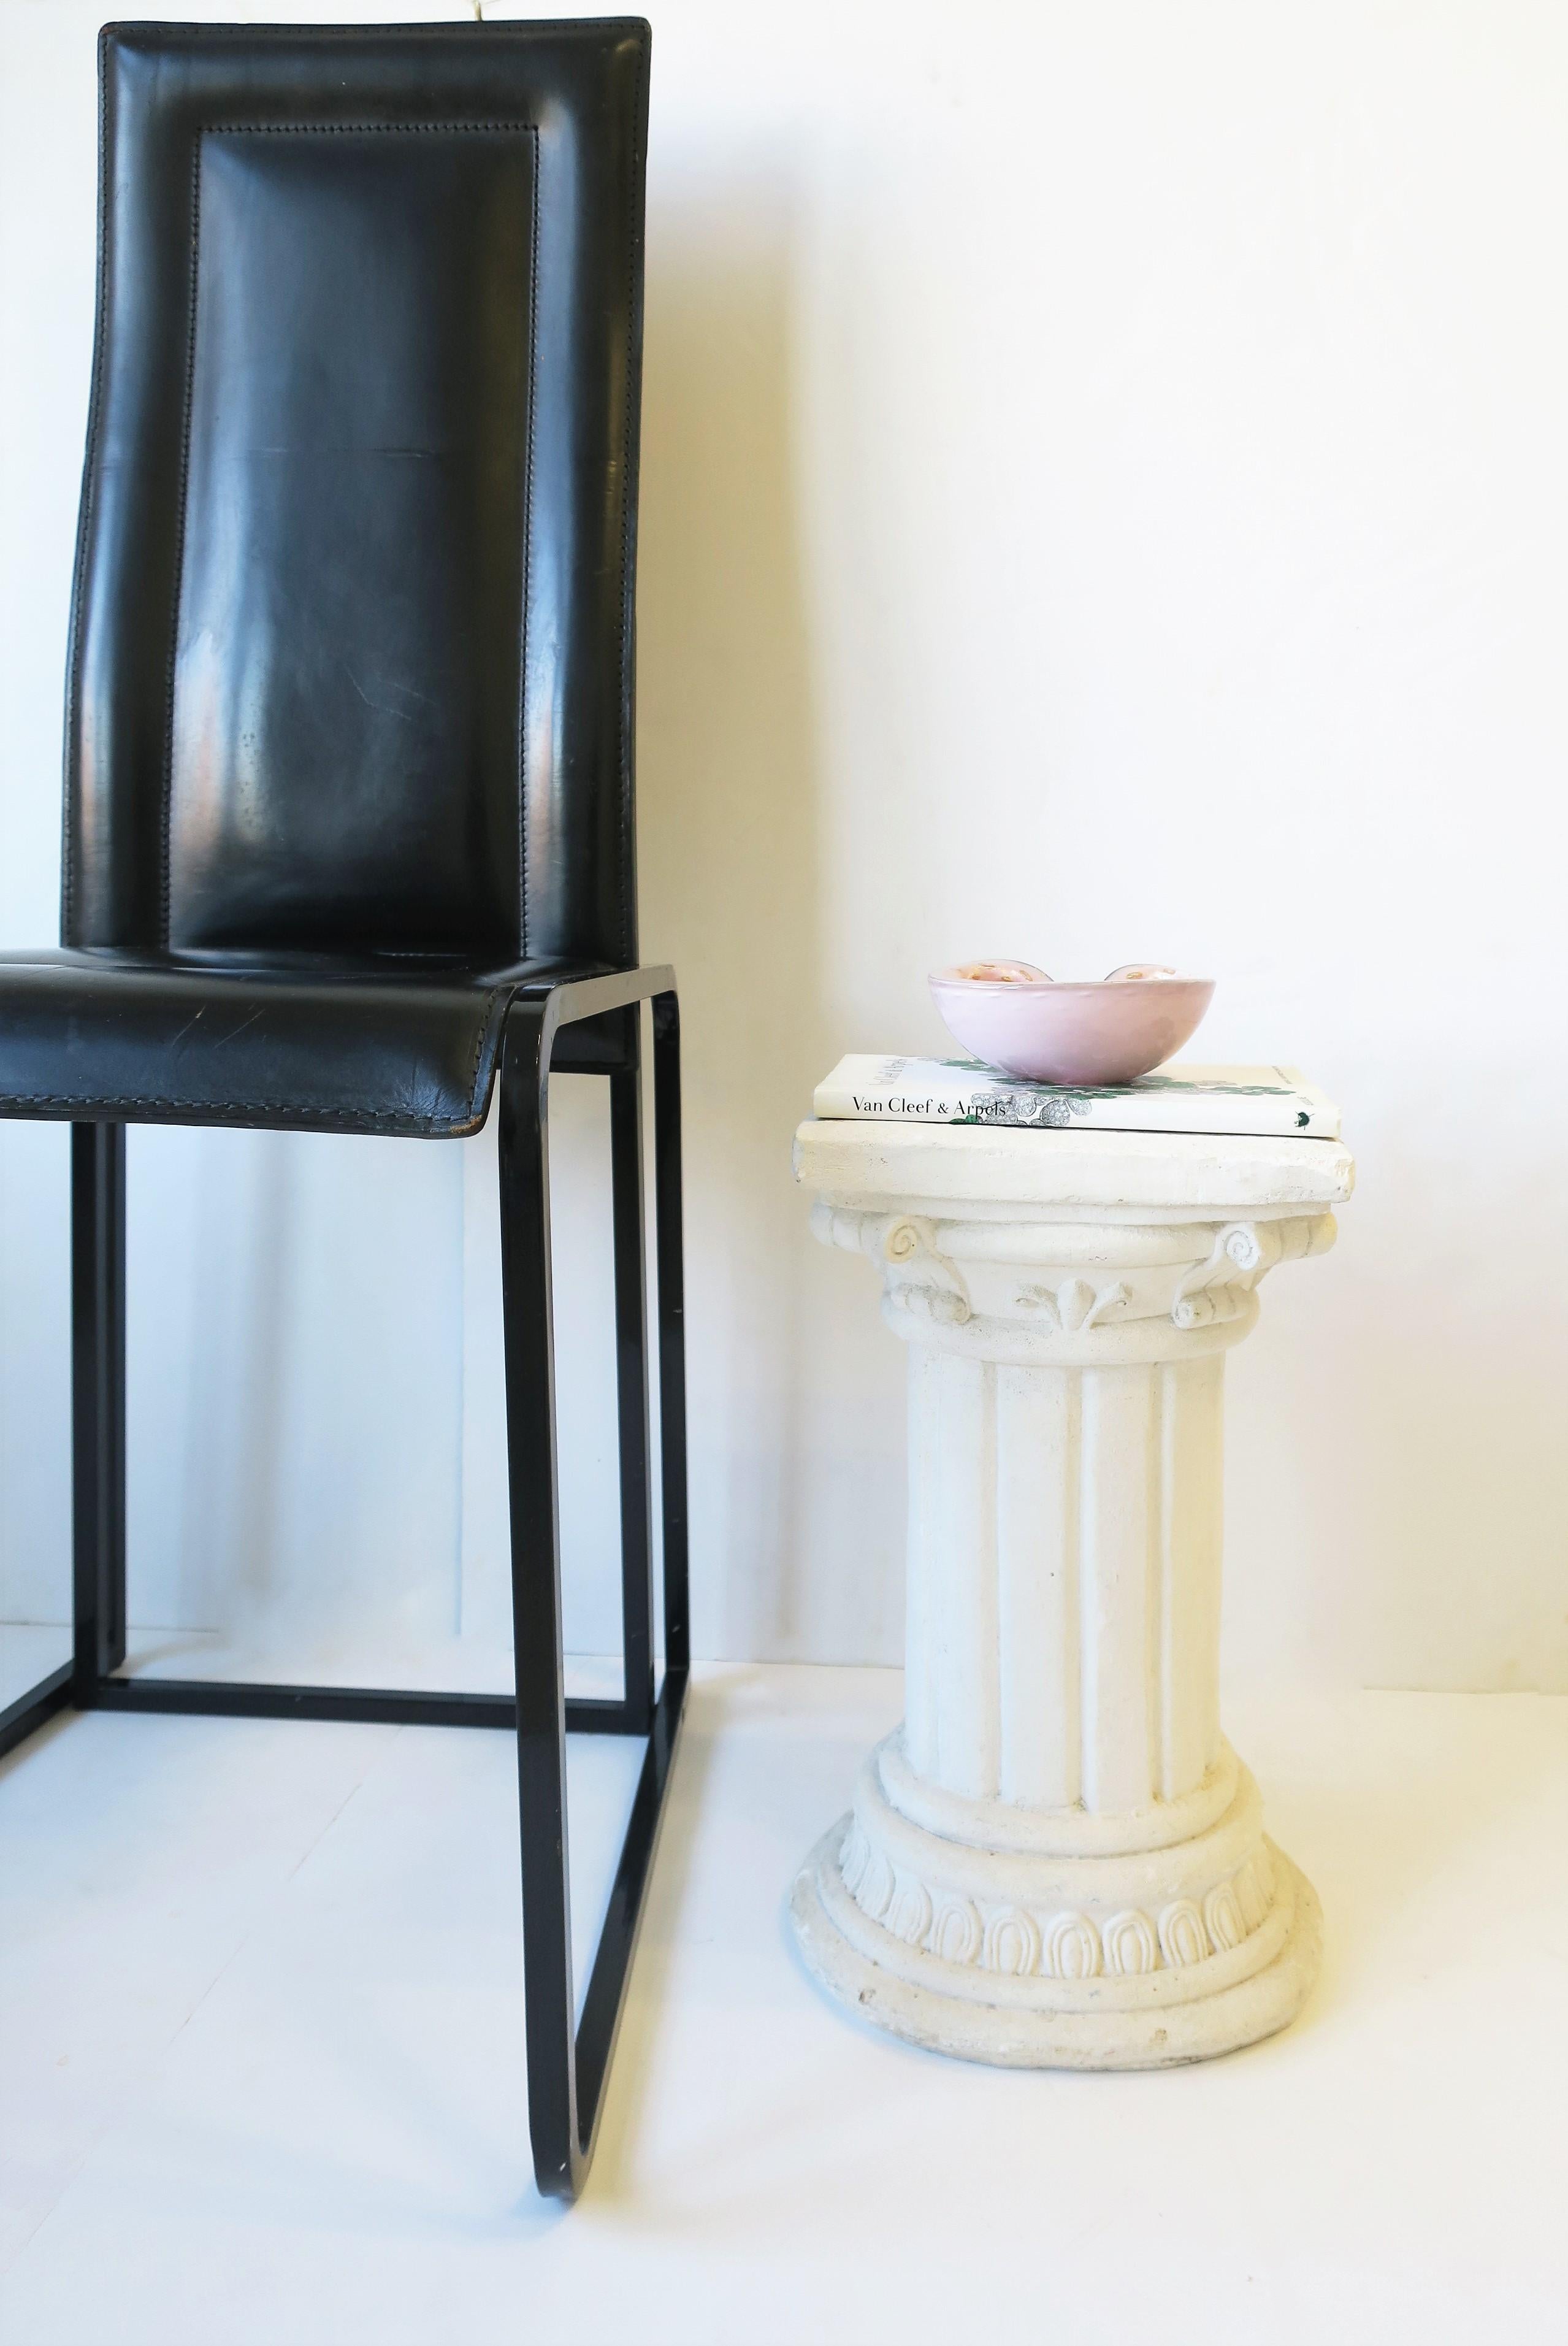 Concrete White Column Pillar Pedestal Side Table or Stand in the Neoclassical Style